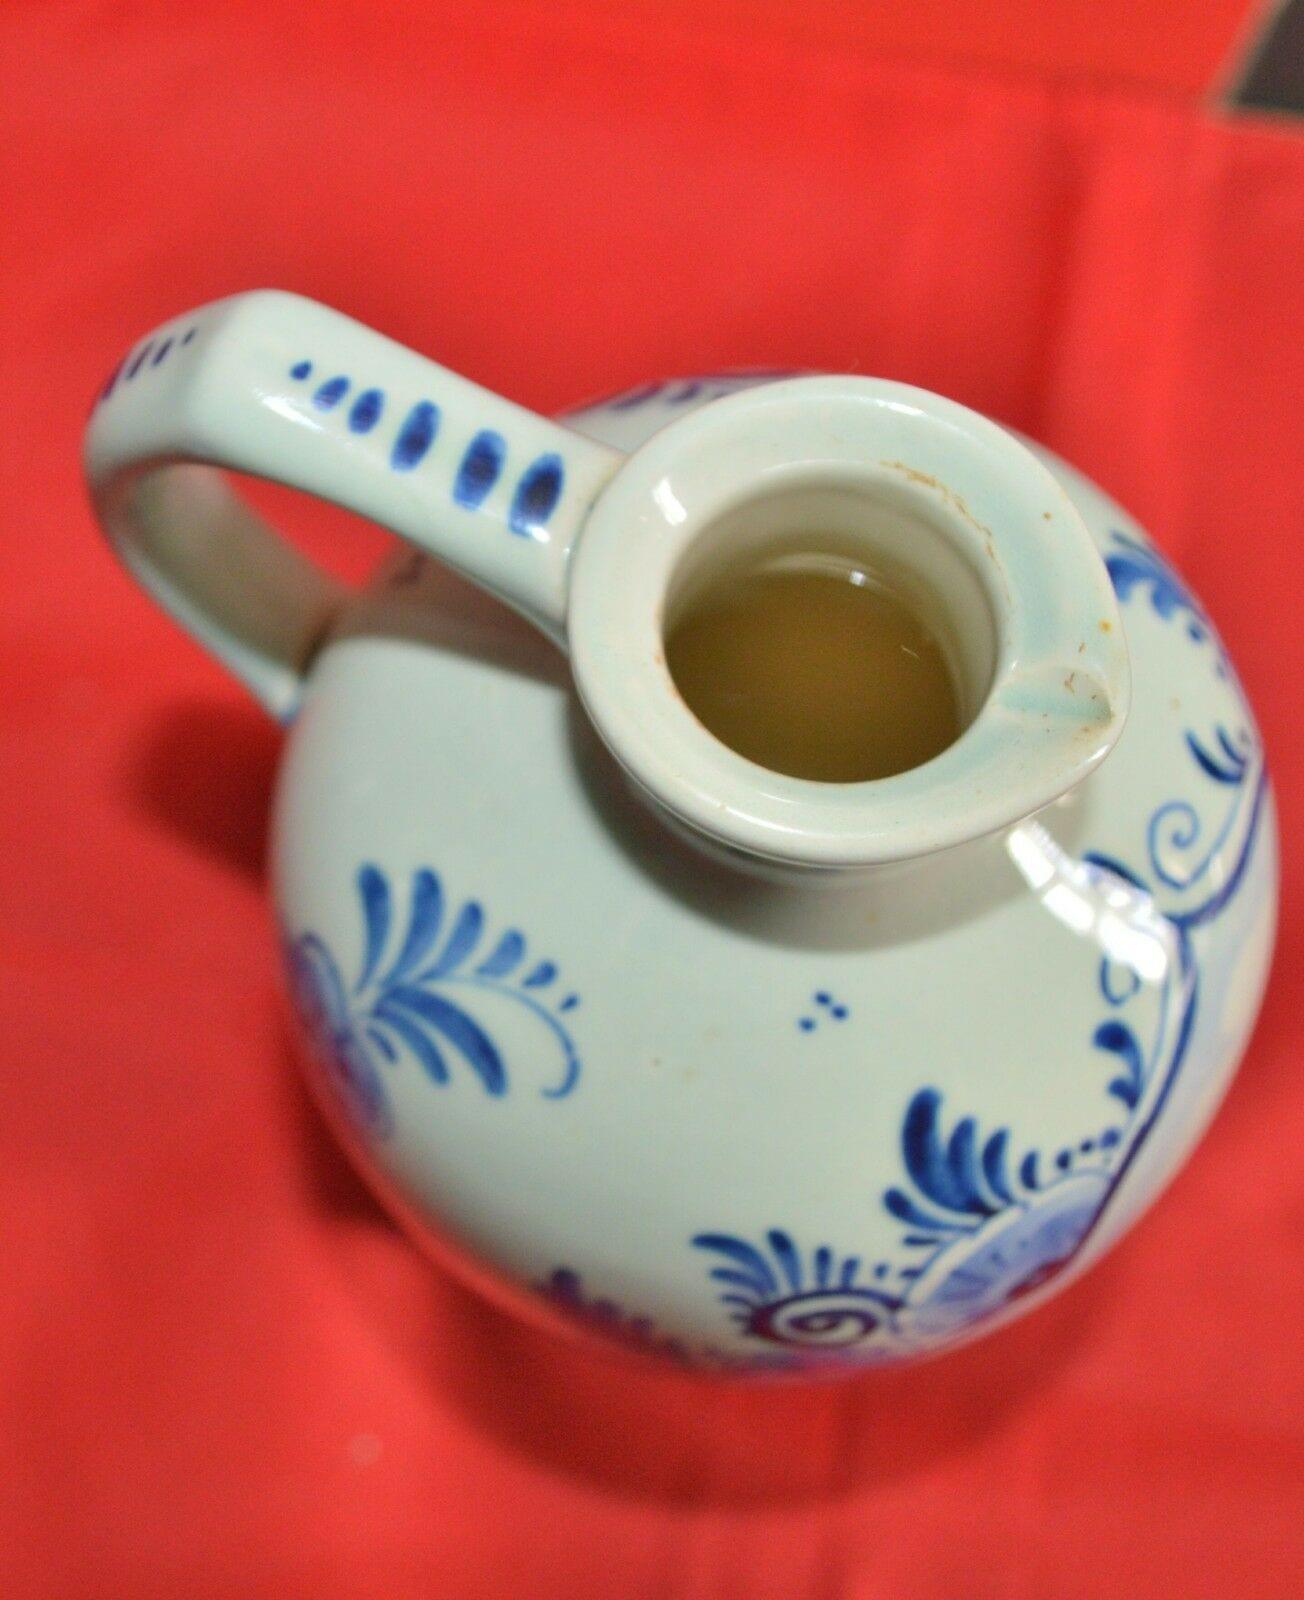 VINTAGE ERVEN LUCAS BOLS DELFT JUG AND STOPPER(PREVIOUSLY OWNED)GOOD CONDITION - TMD167207